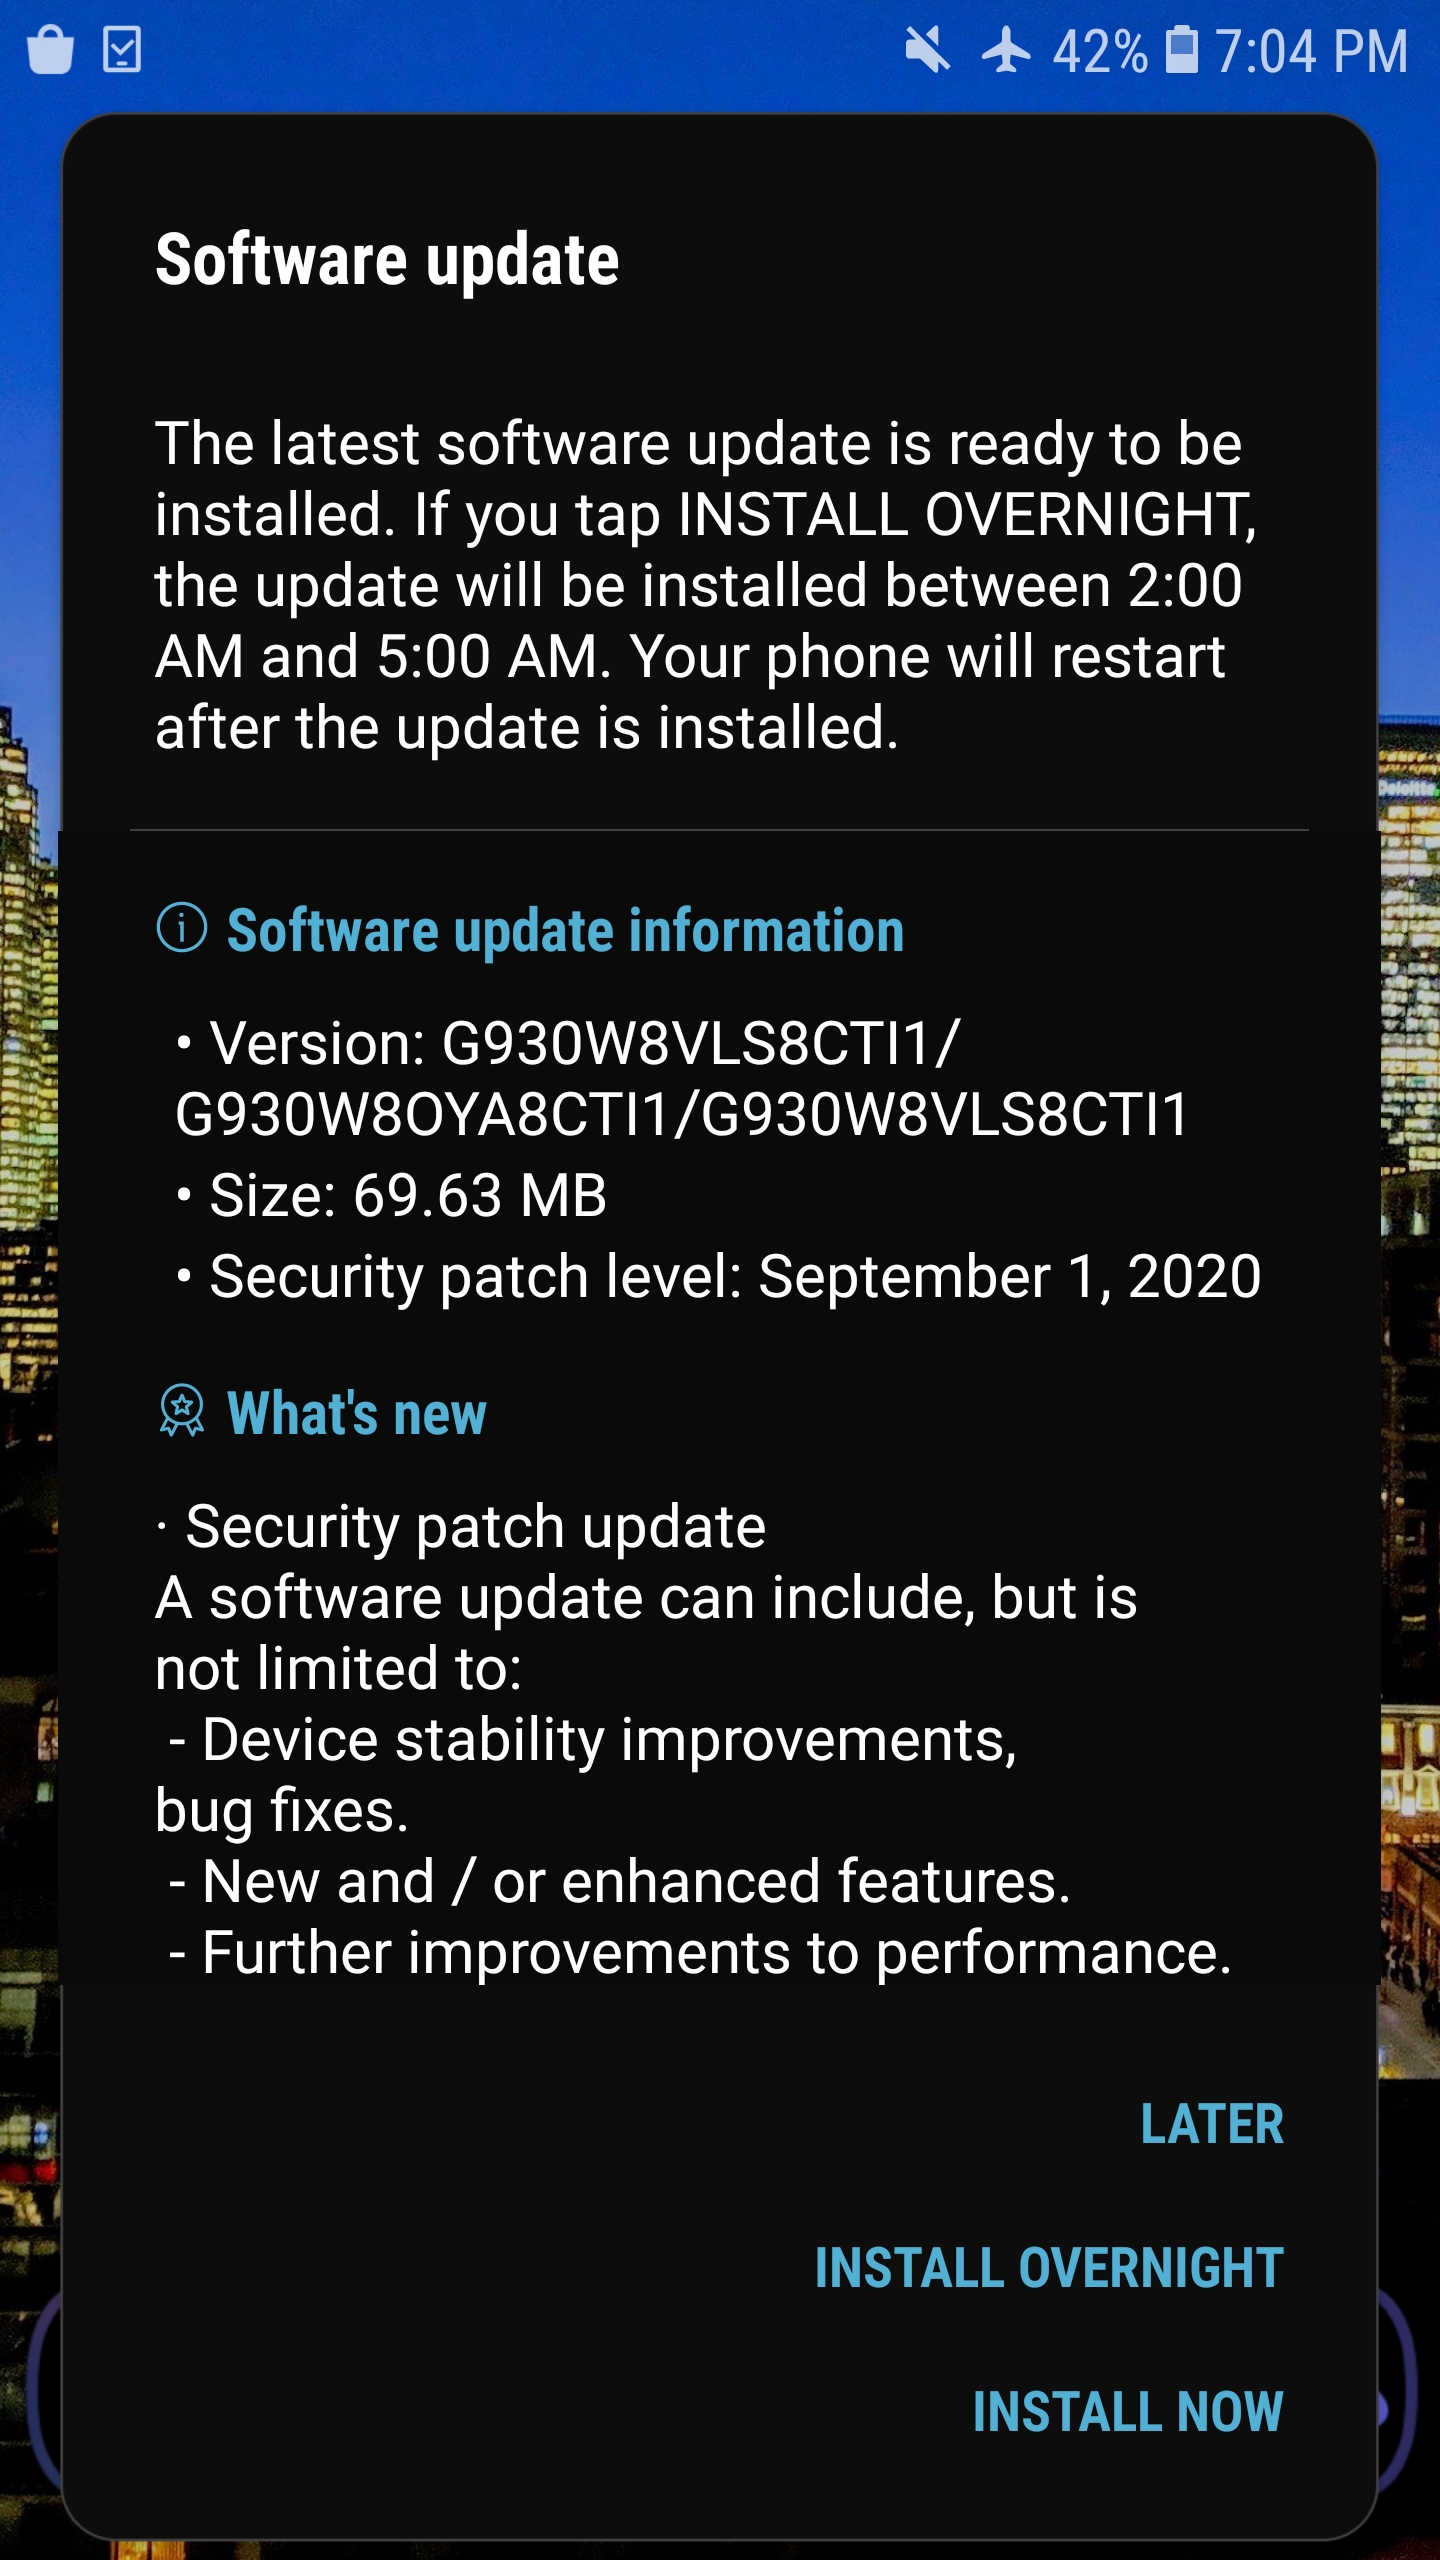 Samsung Galaxy S7 September 2020 Security Patch Software Update